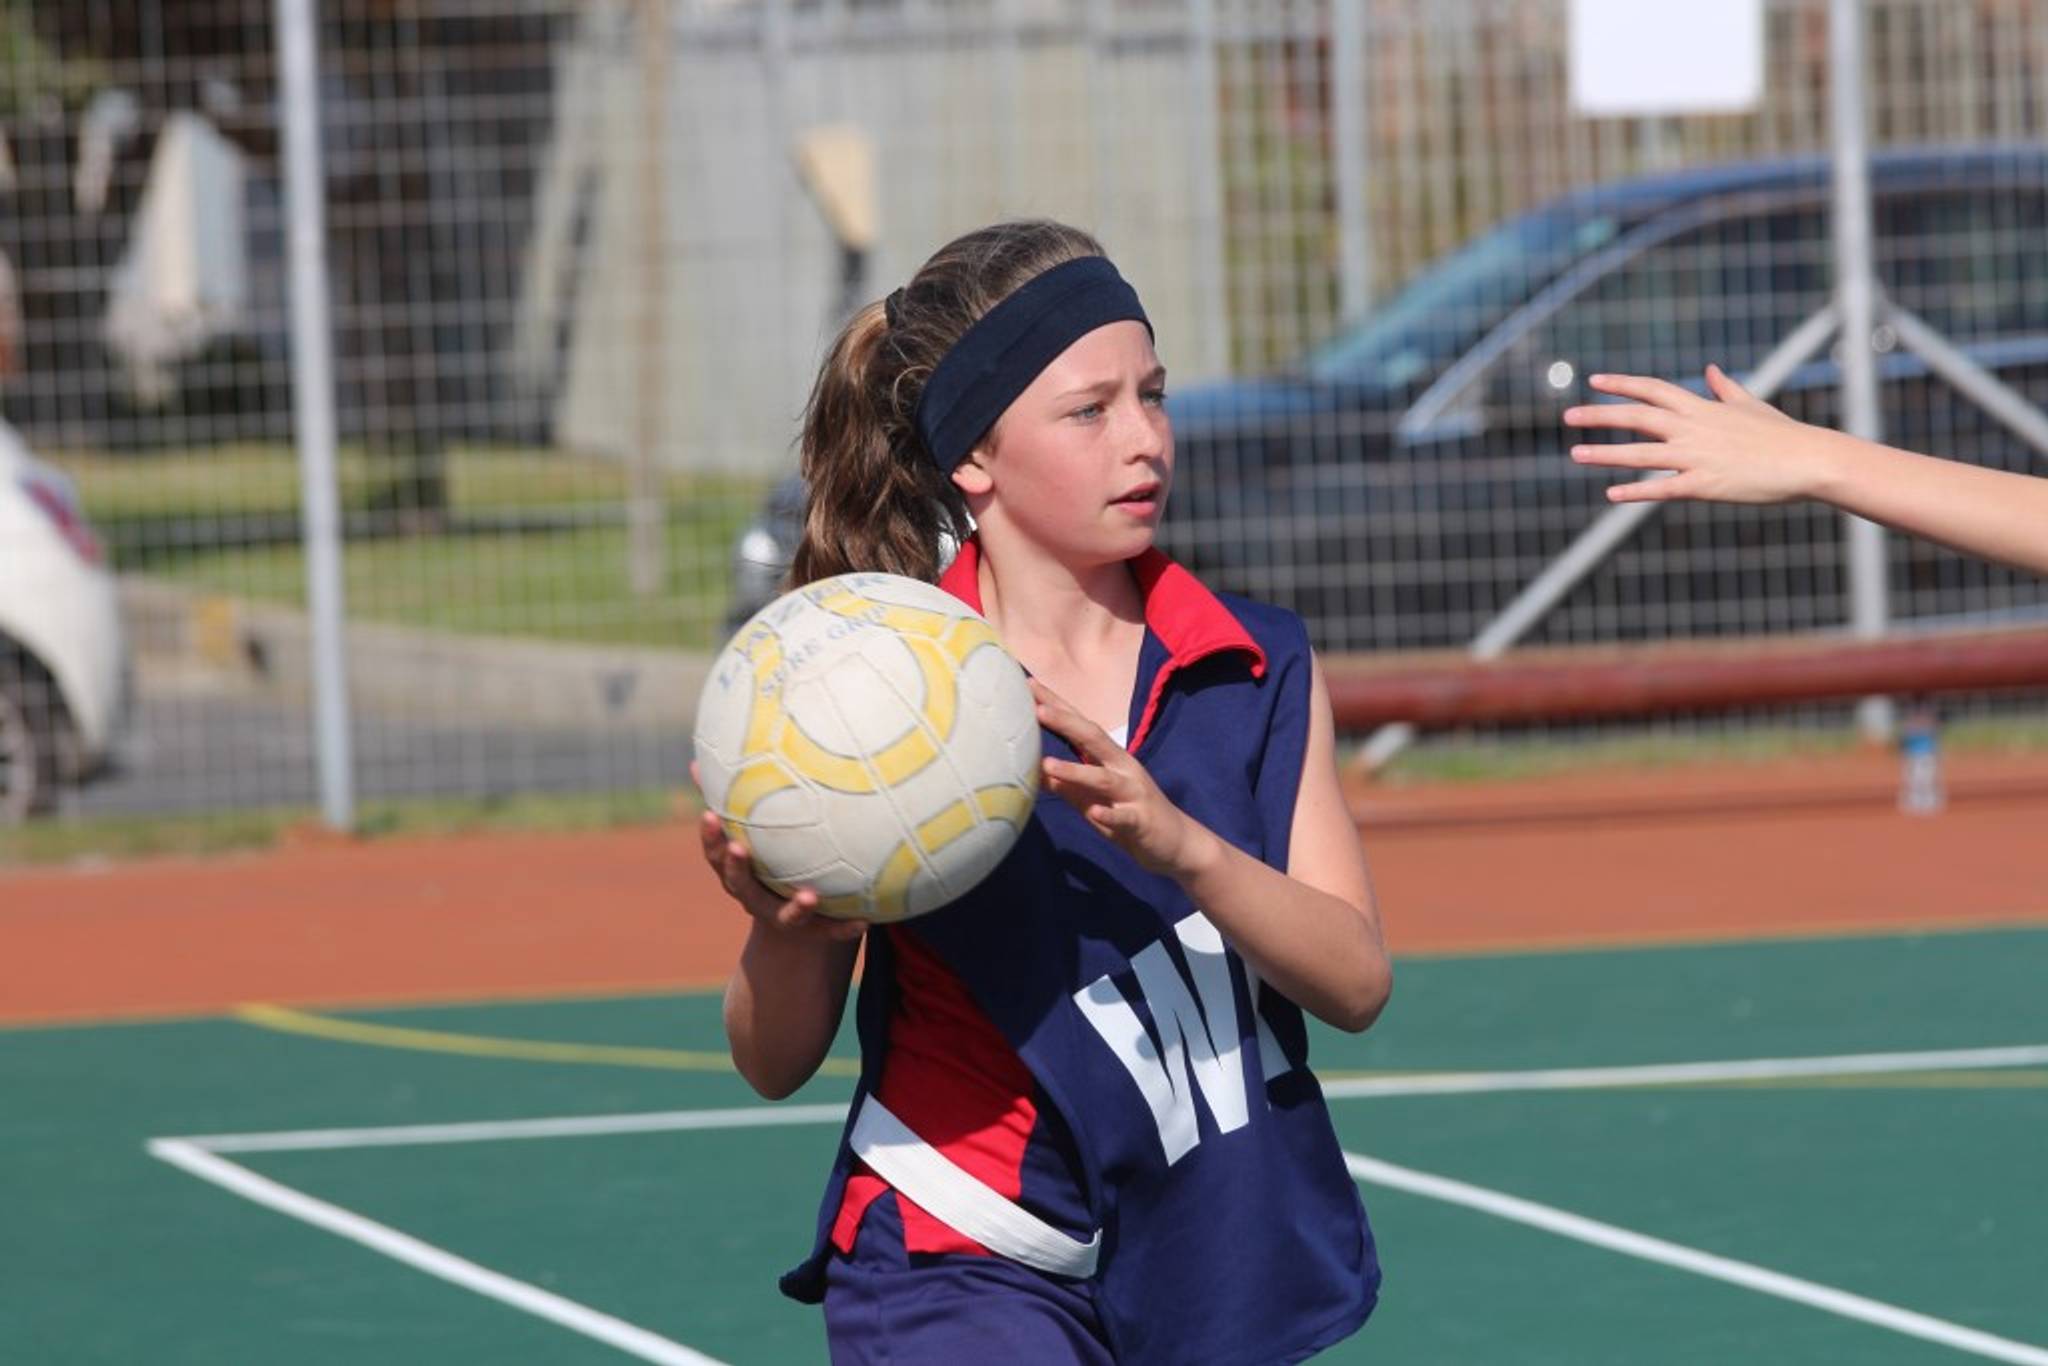 Netball could get British women fit